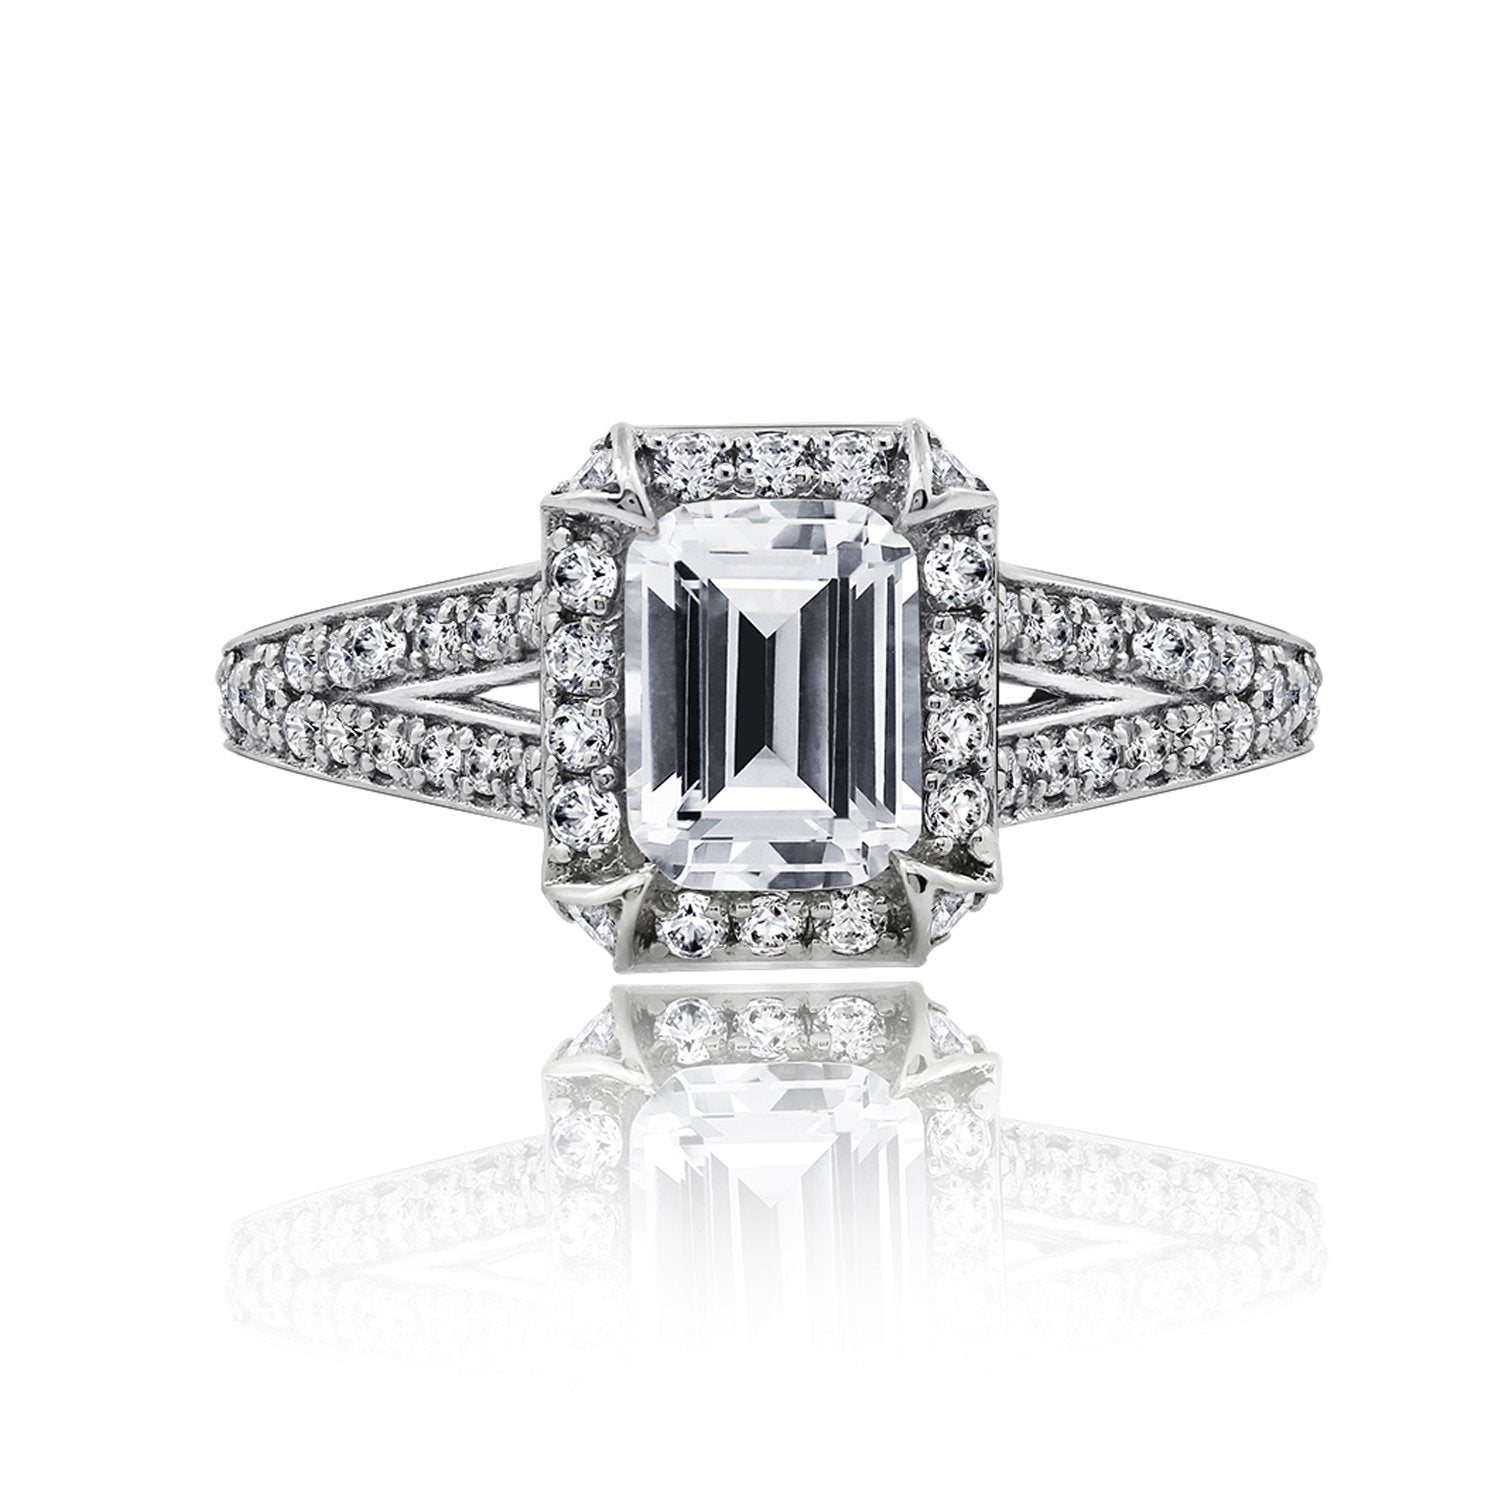 Gemour Platinum clad Sterling Silver Cubic Zirconia Emerald Cut Halo Ring with Split Shank